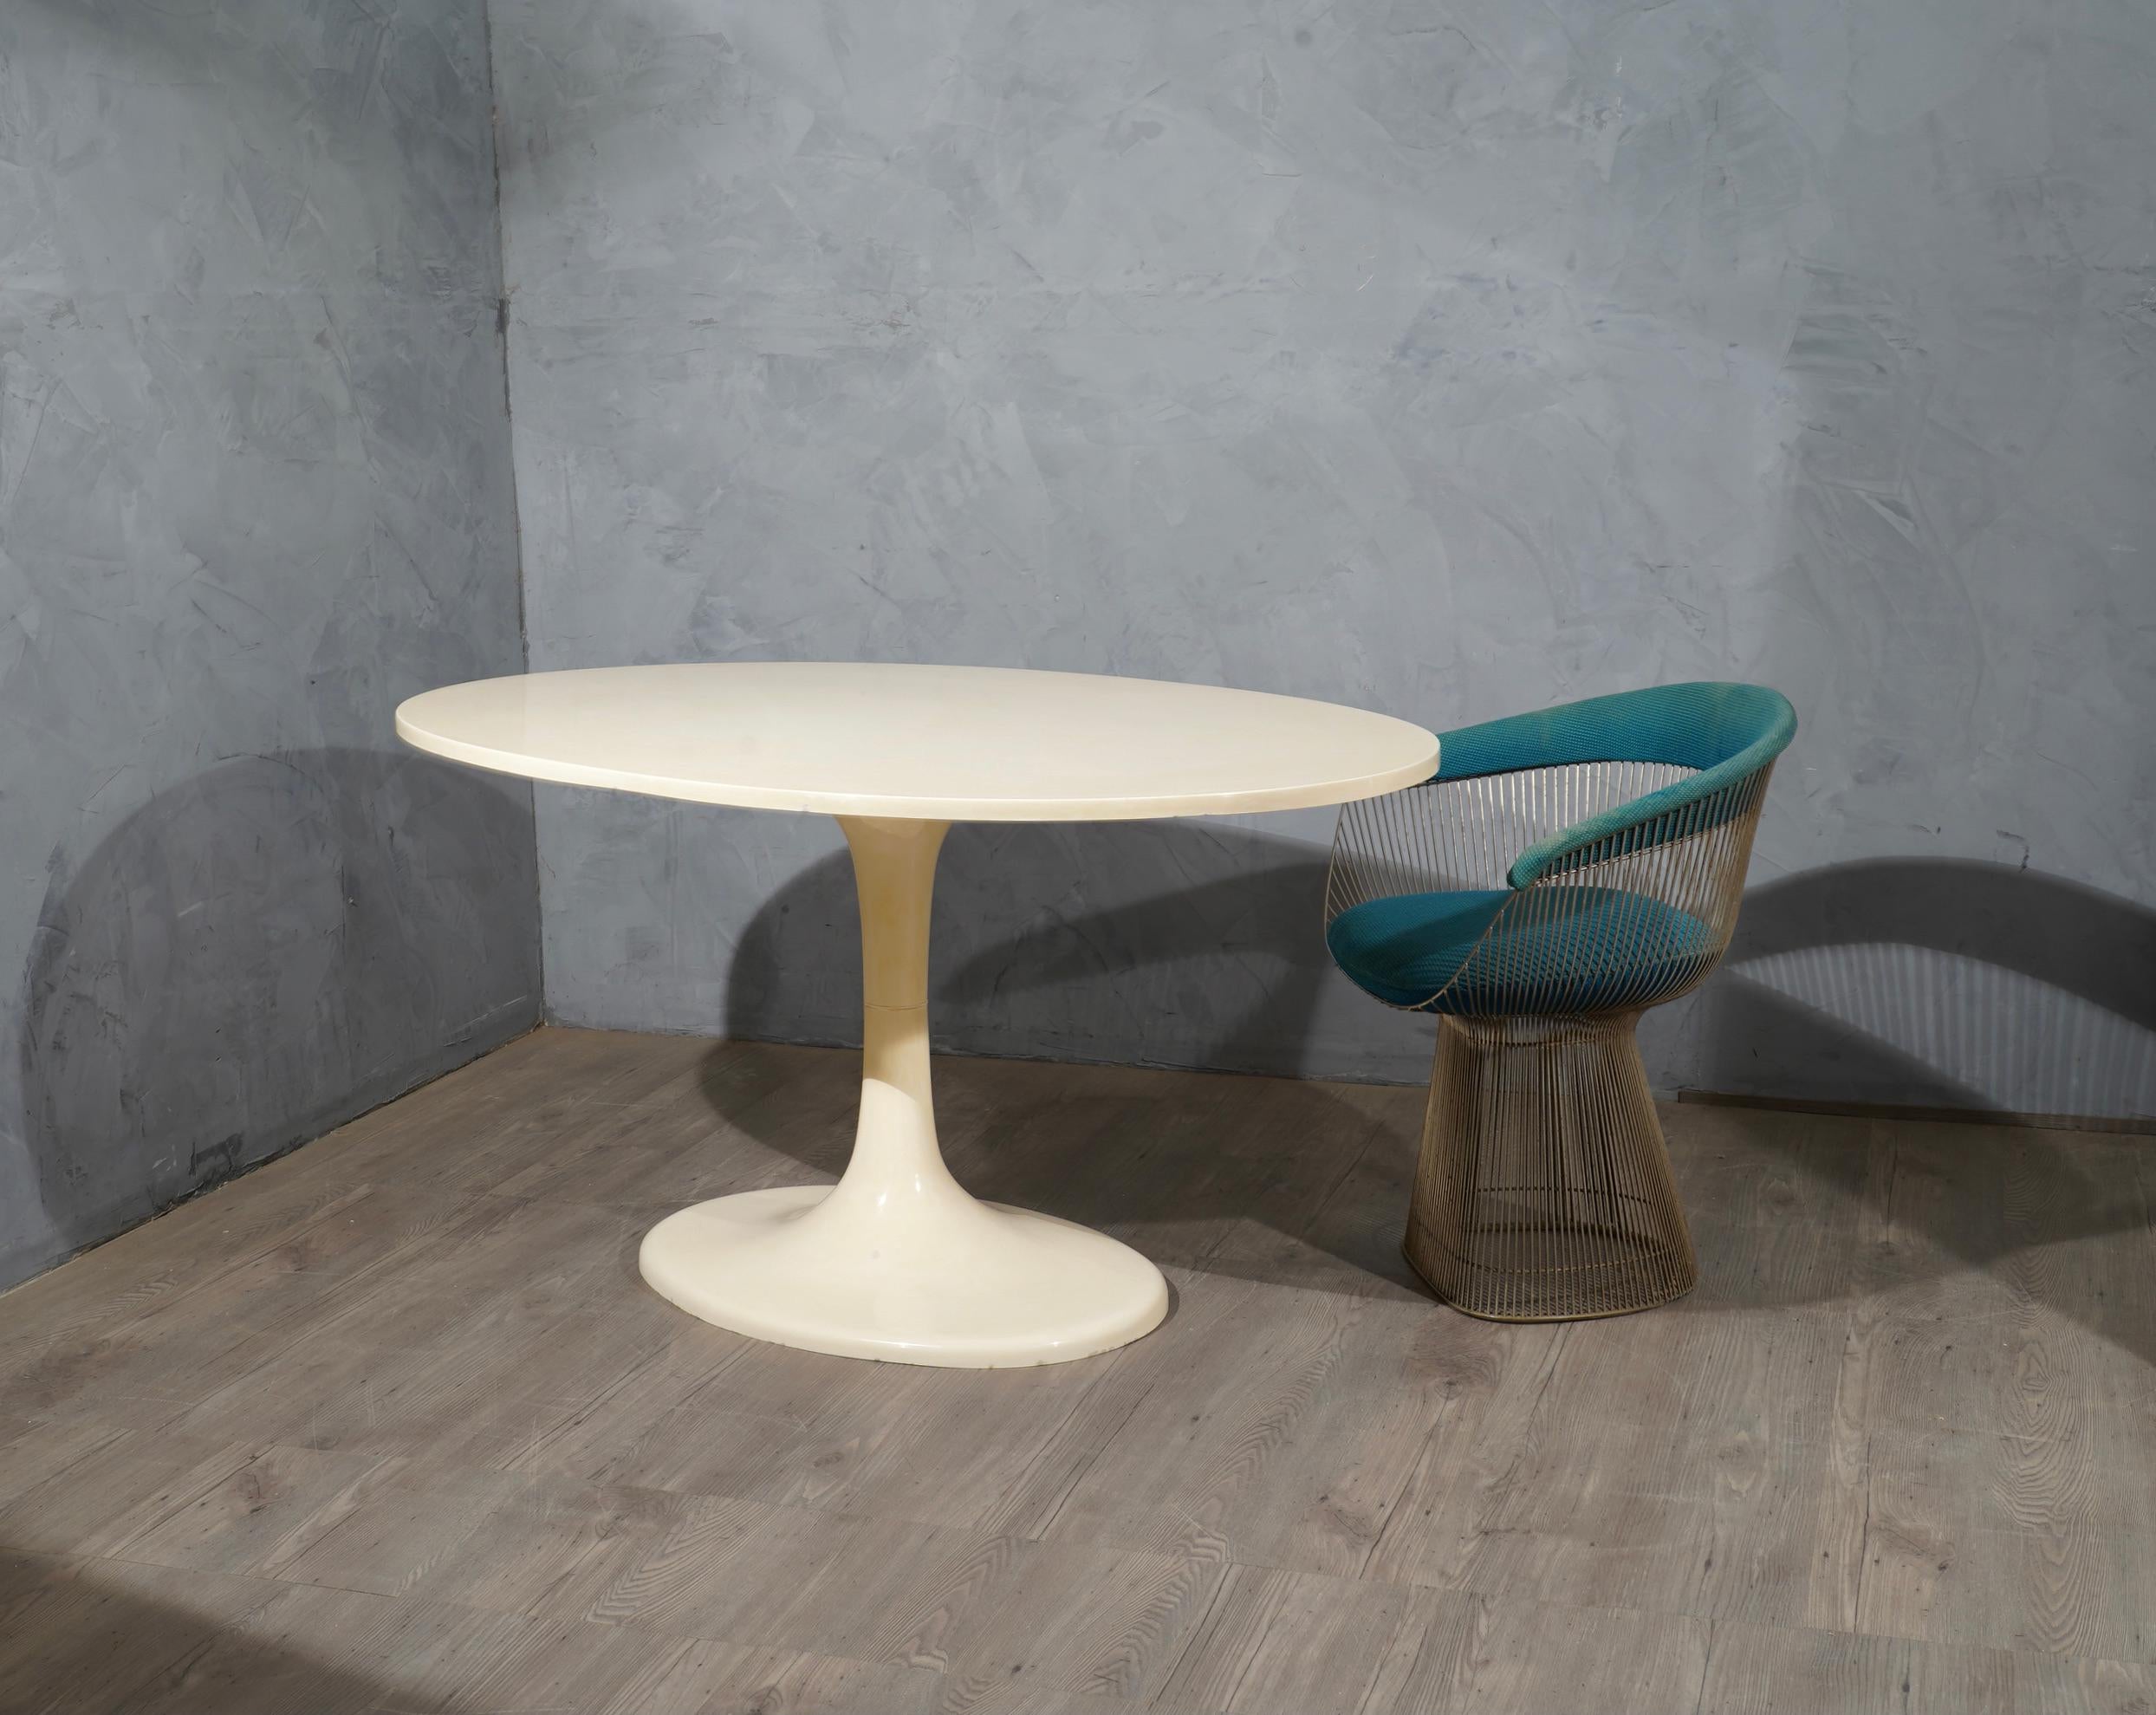 Beautiful oval table in the tulip shape, from the middle of the century.

The structure is all in plastic and white resin. Its shape is the Classic tulip shape by Eero Saarinen. The table is in a perfect oval.

Restored by the expert hands of our